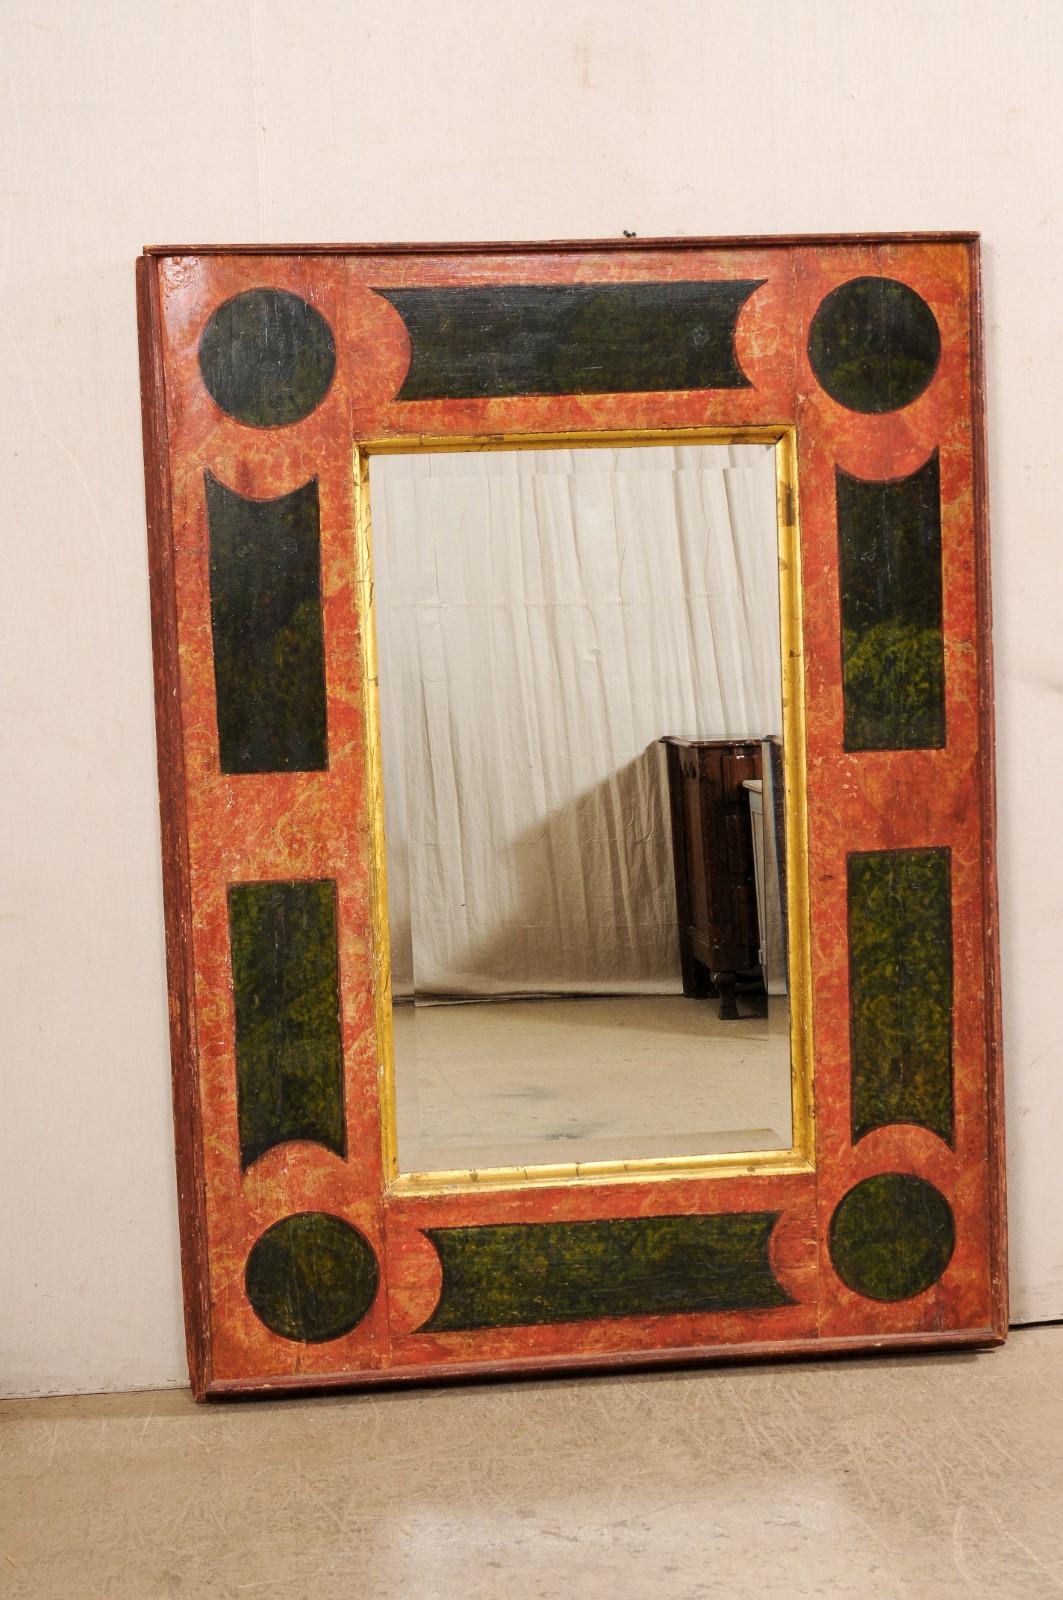 An Italian large-sized wood mirror, with its original hand-painted and gilt finish, from the 18th century. This antique mirror from Italy is a large sized piece at approximately 4.5 feet wide and 6.5 feet in height. This rectangular-shaped mirror